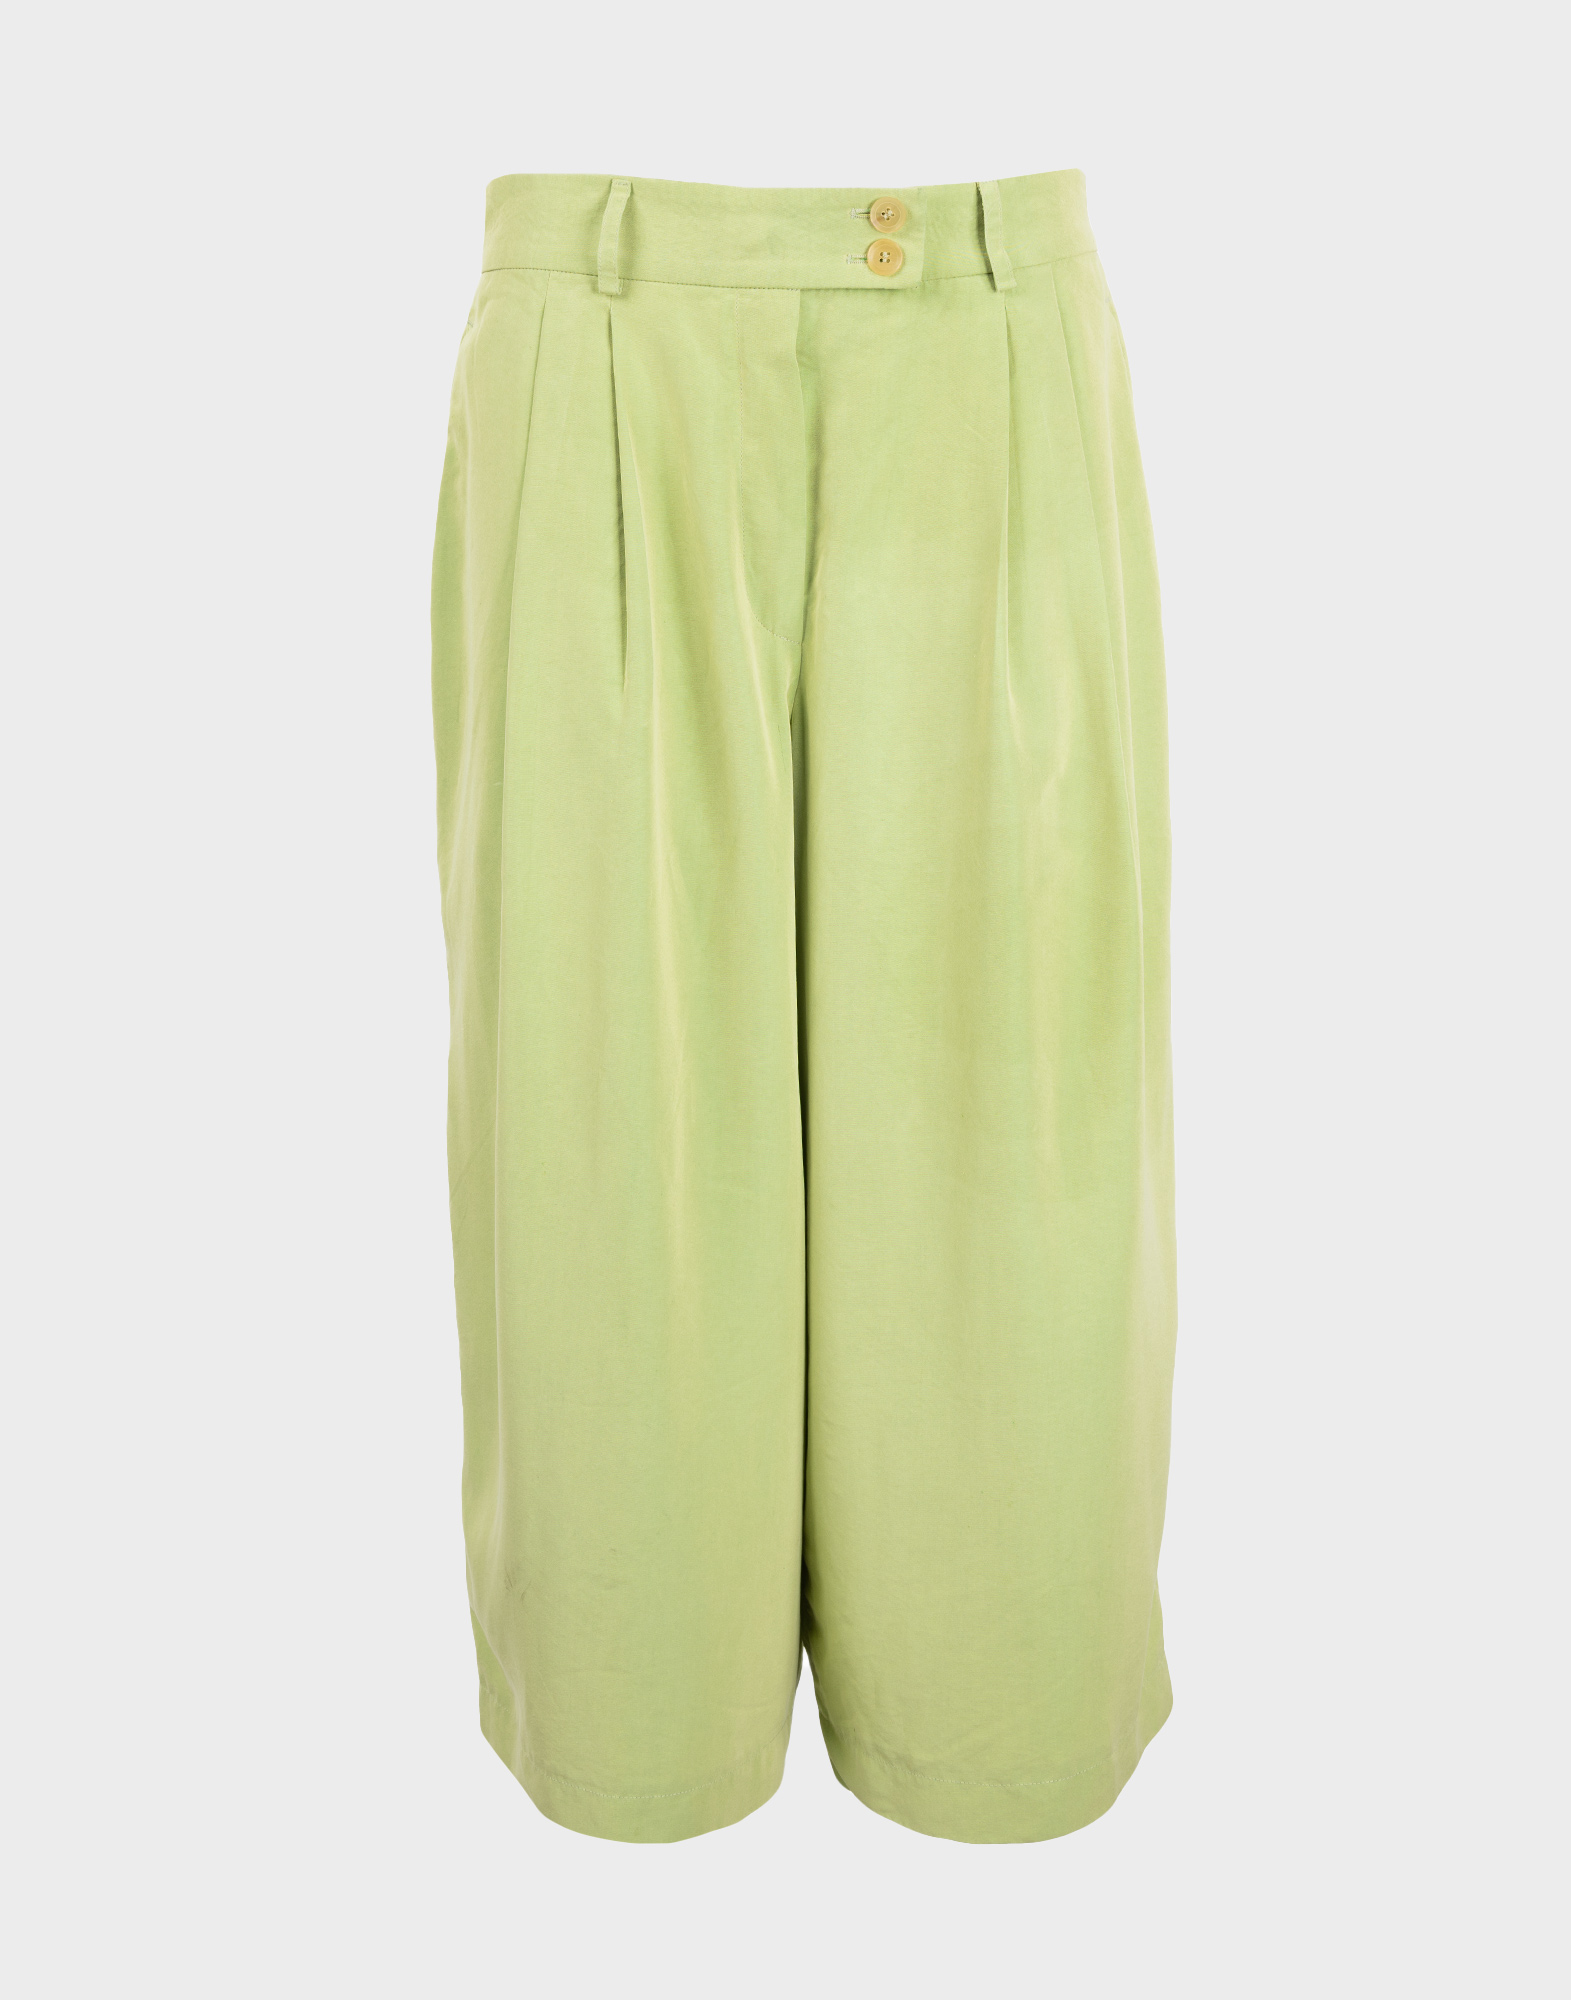 green women's soft silk trousers, calf-length, two-button side fastening